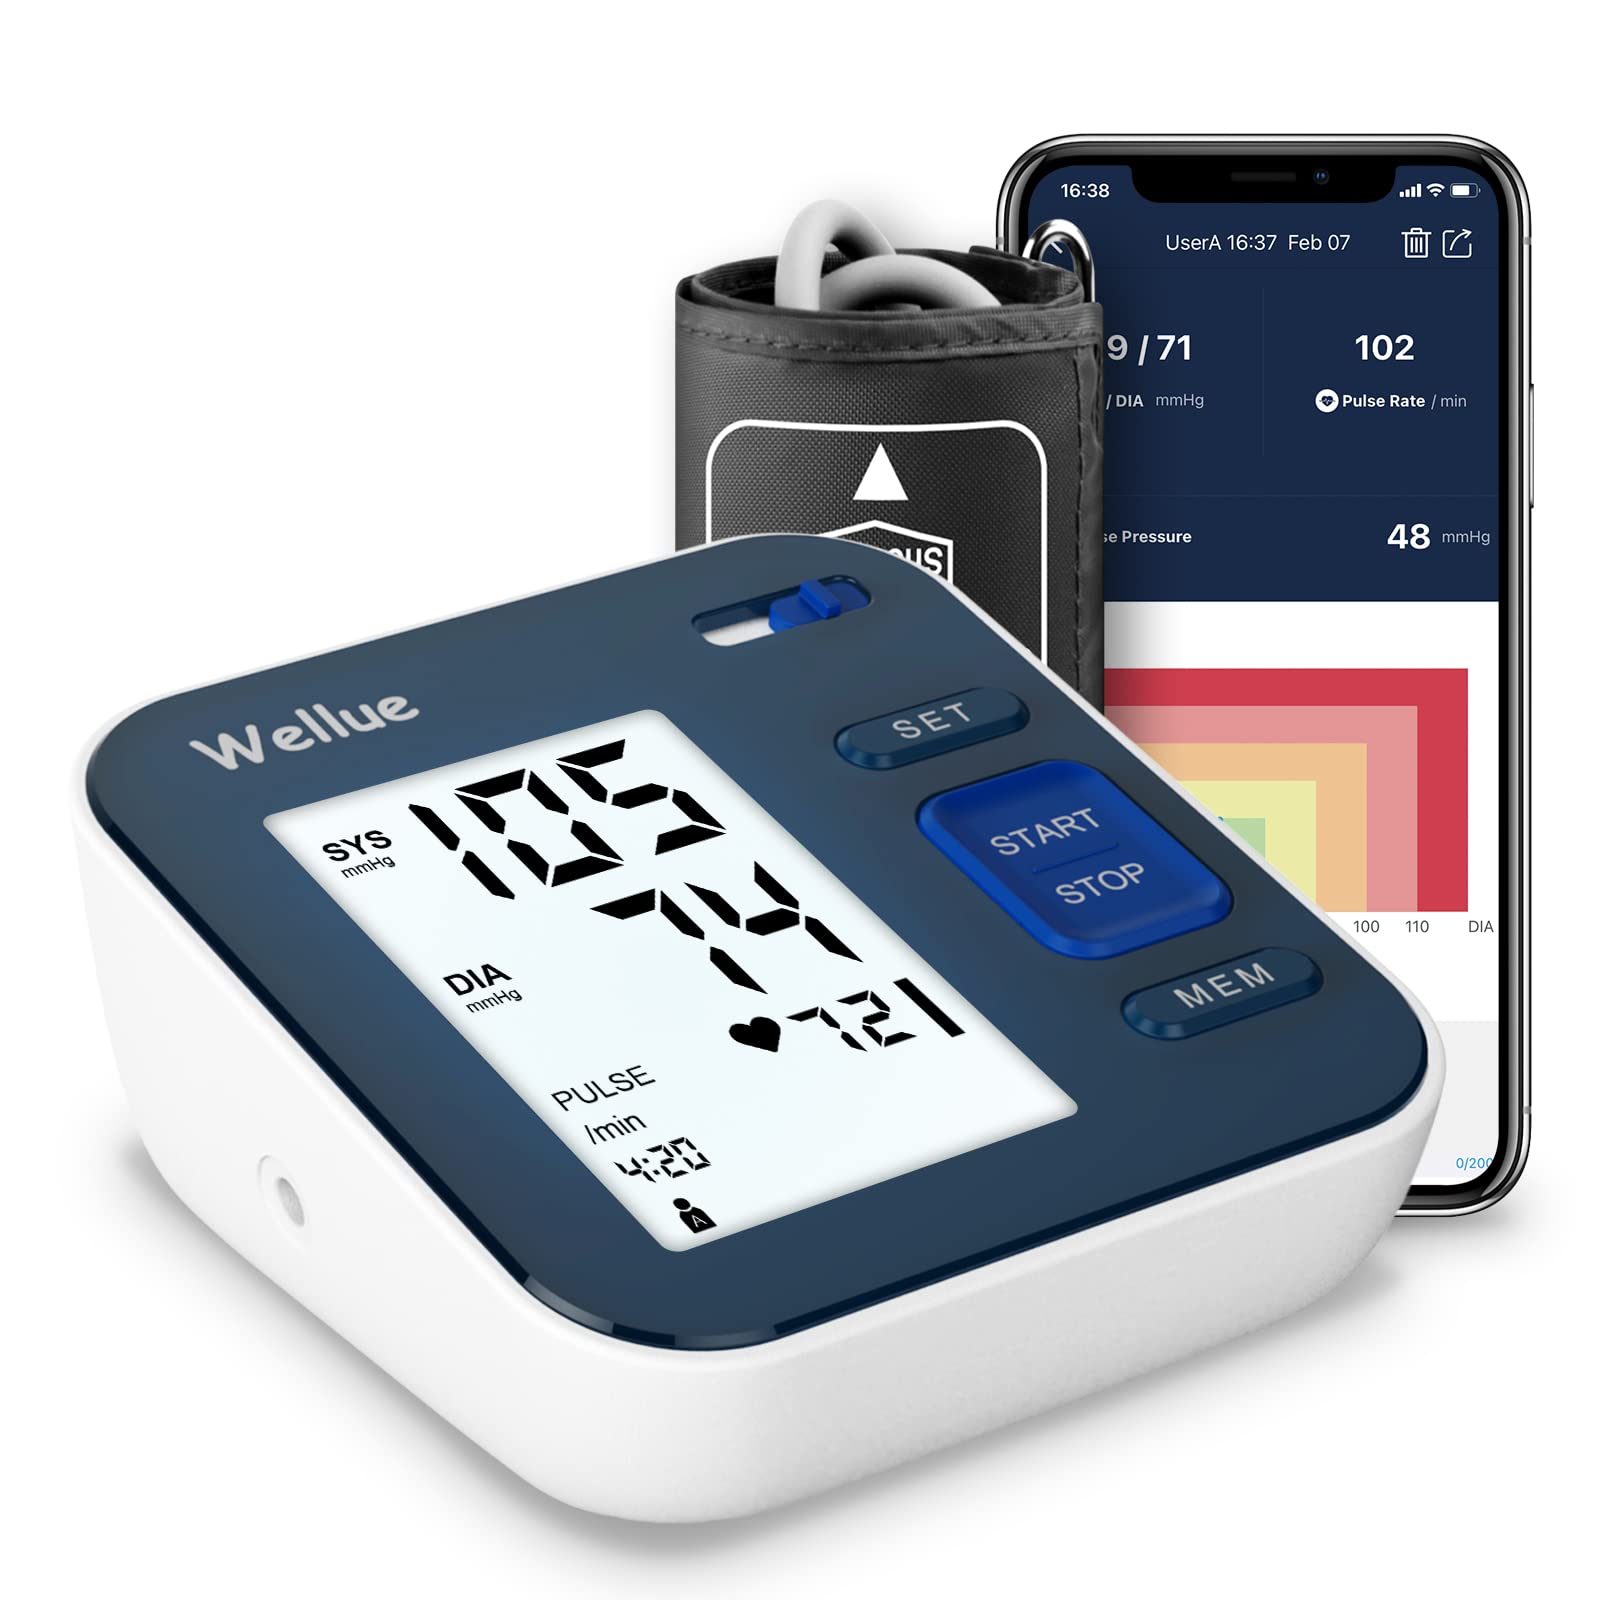 Wellue BP2 Blood Pressure Monitor for Home Use, Upper Arm Bluetooth Blood  Pressure Machine with Cuff Size 8.6-16.5, Portable Wireless BP Monitor